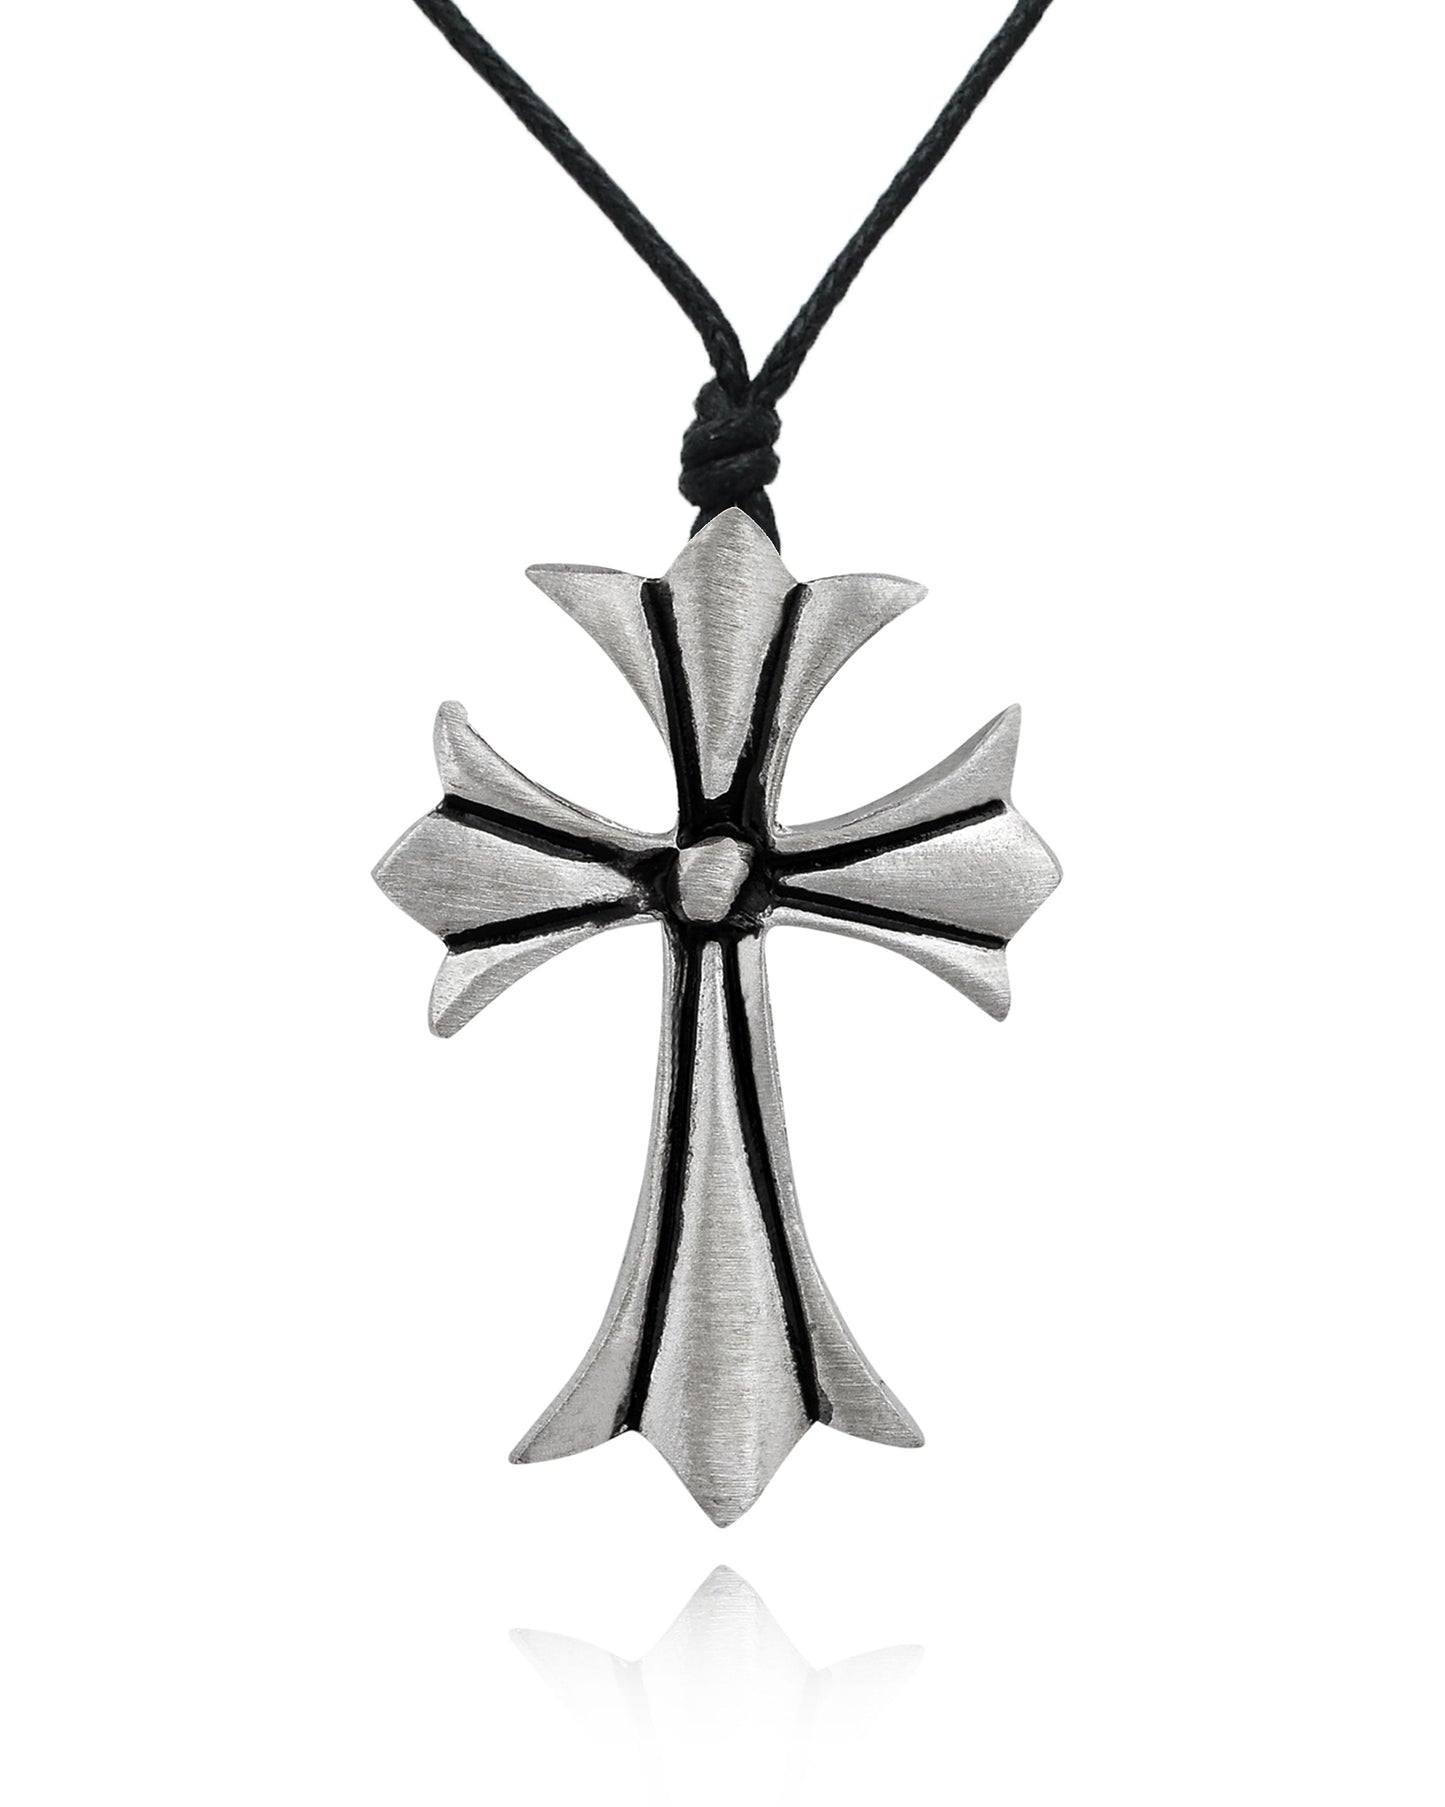 Simple Cross Silver Pewter Charm Necklace Pendant Jewelry With Cotton Cord